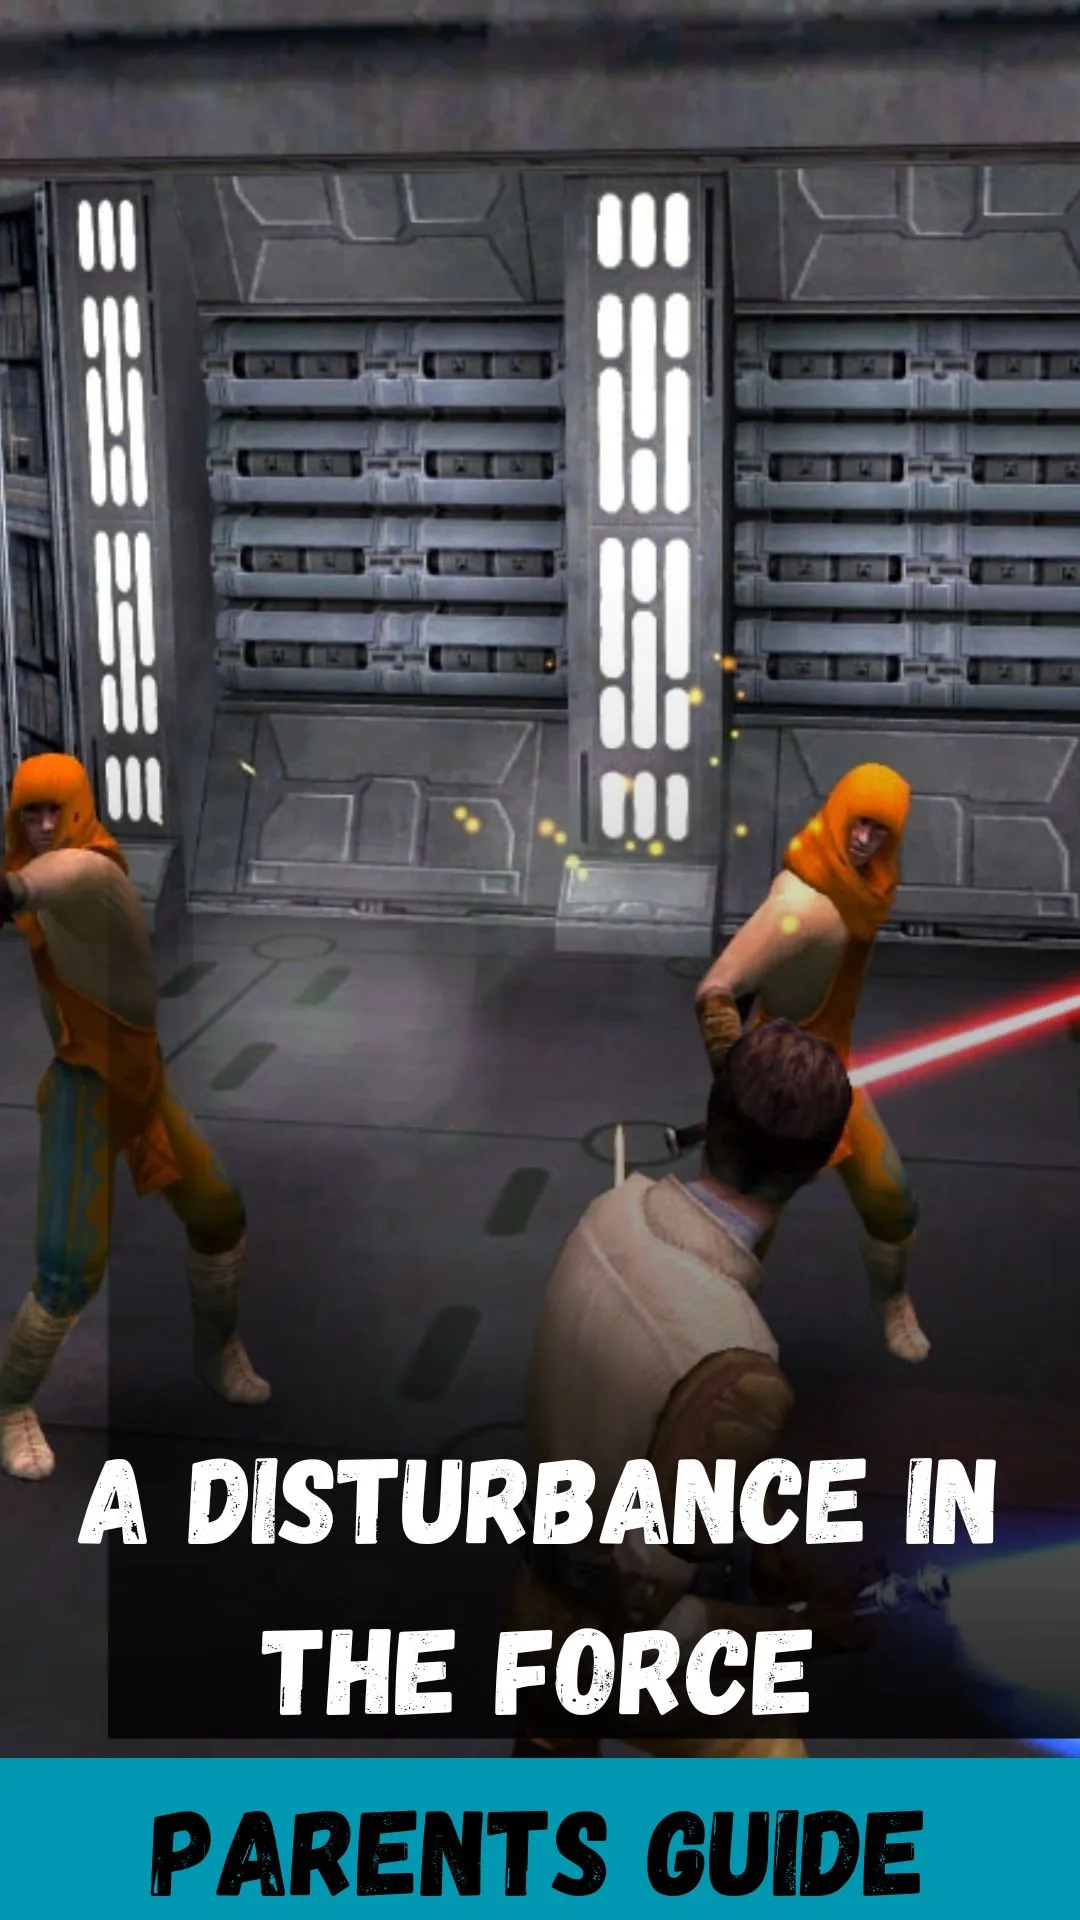 A Disturbance in the Force Parents Guide (1)